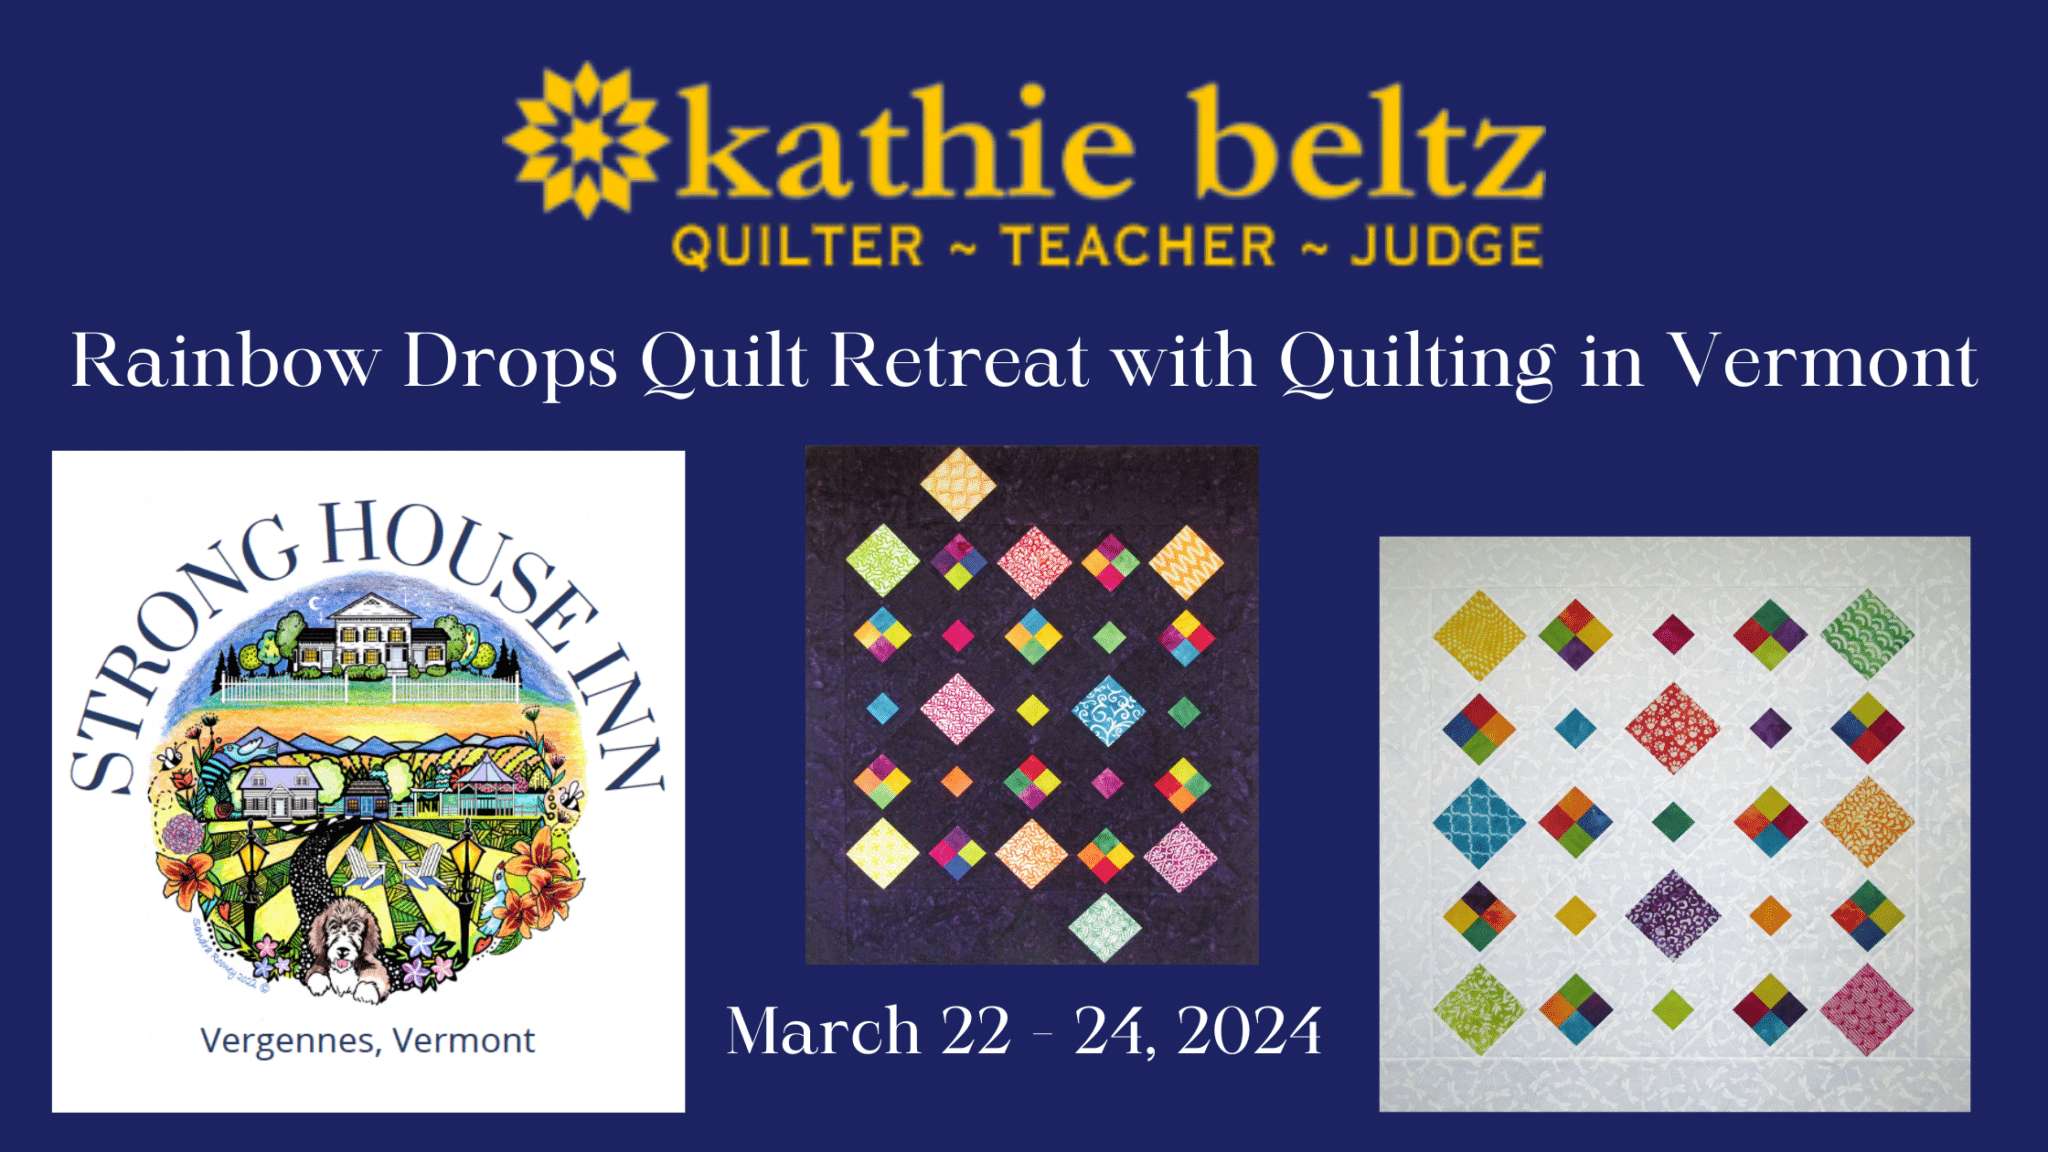 Ad for Kathie Beltz with pictures of quilts with diamond patterns